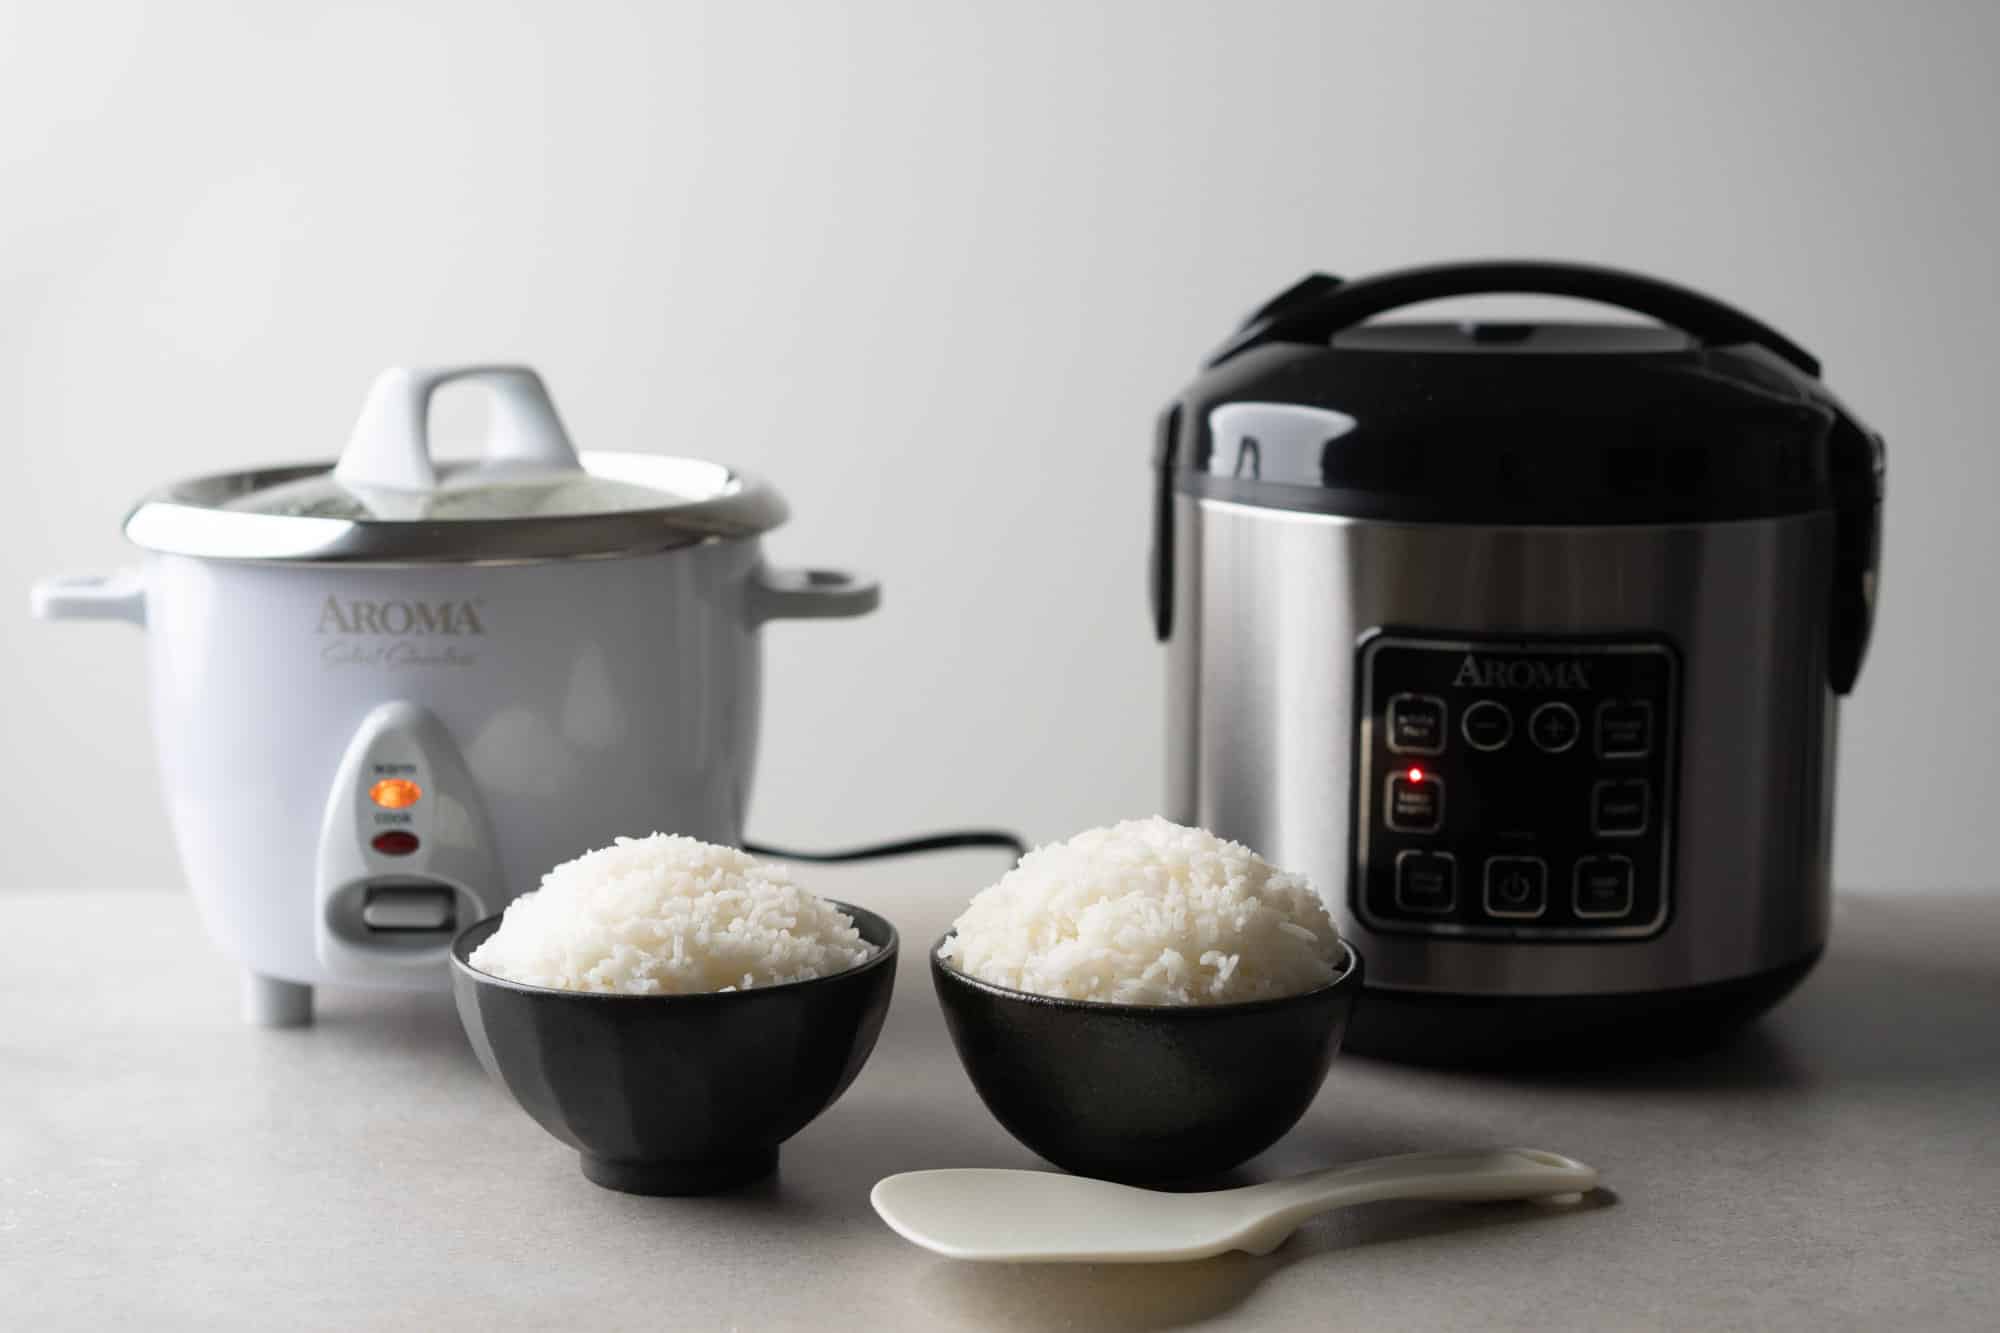 https://www.hungryhuy.com/wp-content/uploads/aroma-rice-cookers-w-rice.jpg